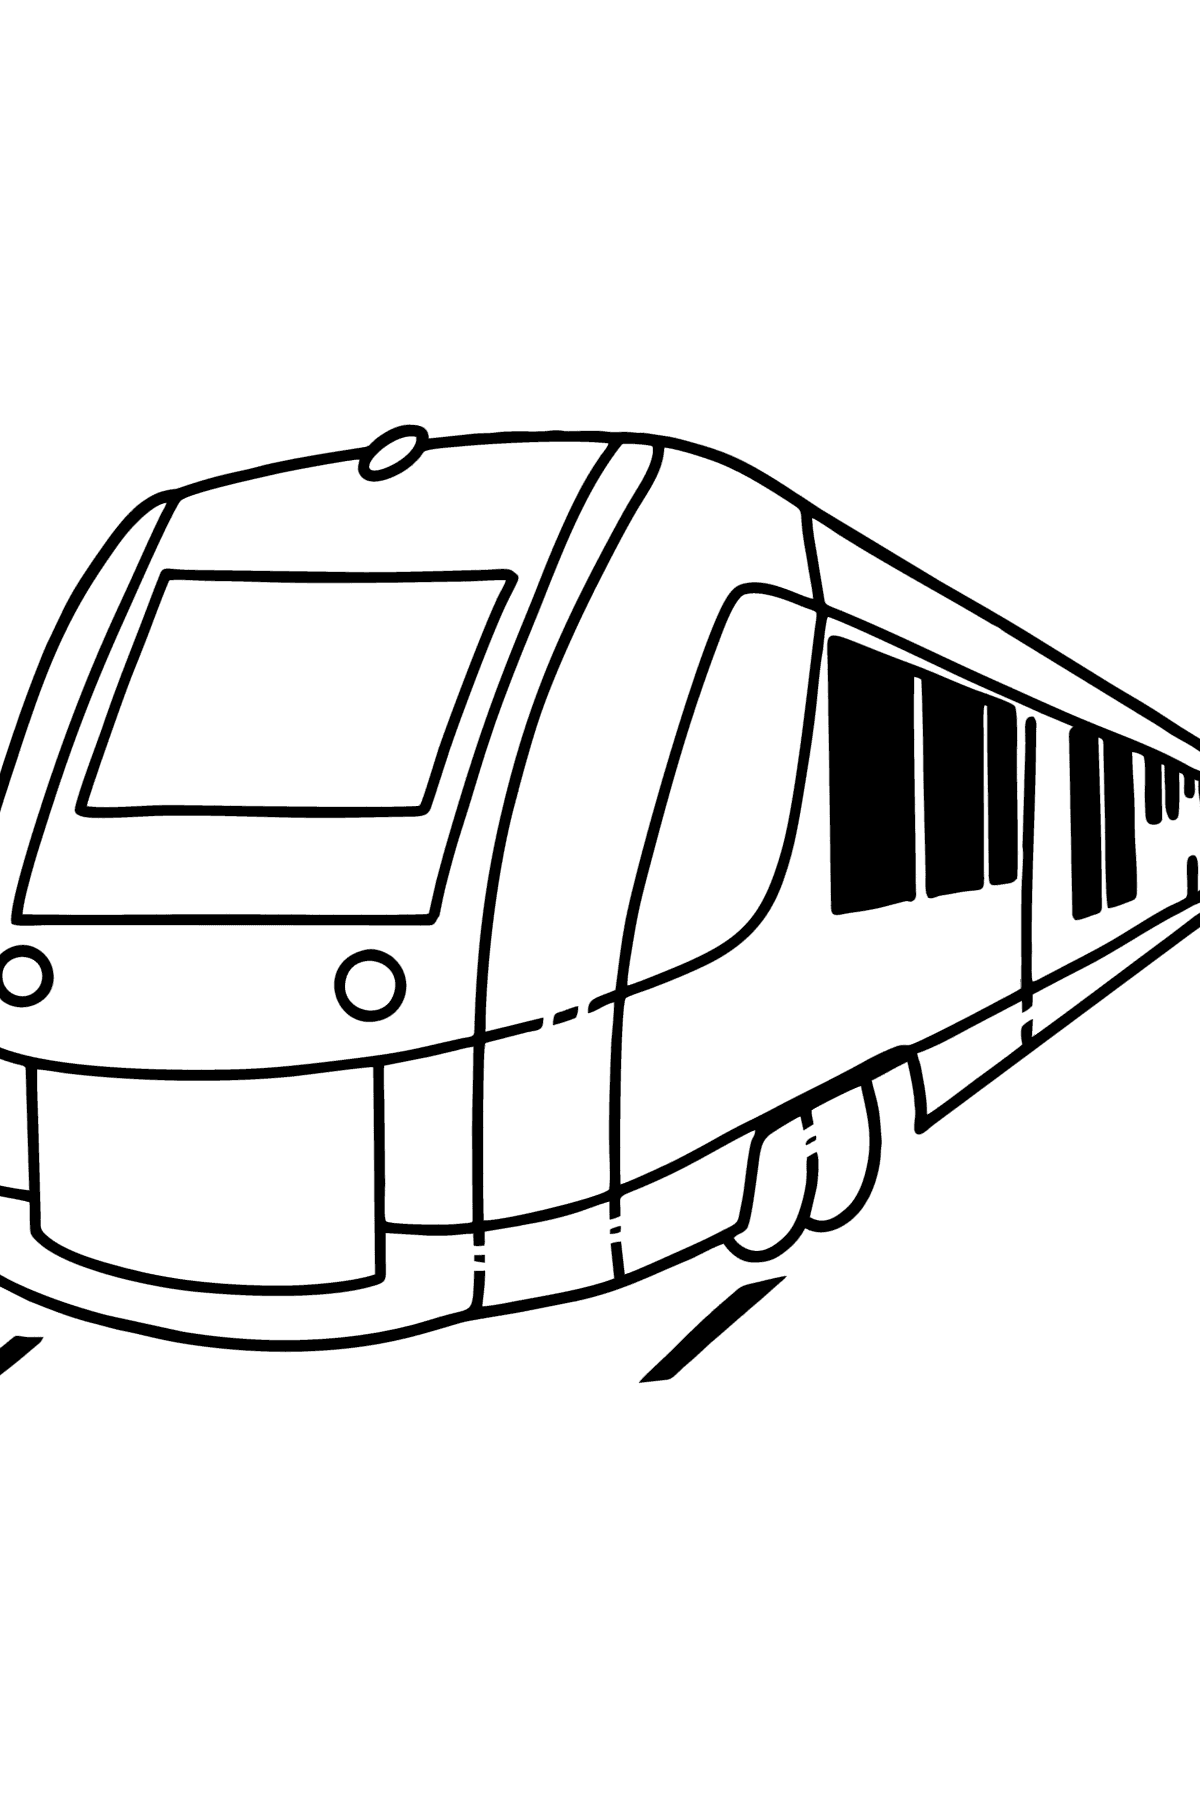 City Train coloring page - Coloring Pages for Kids